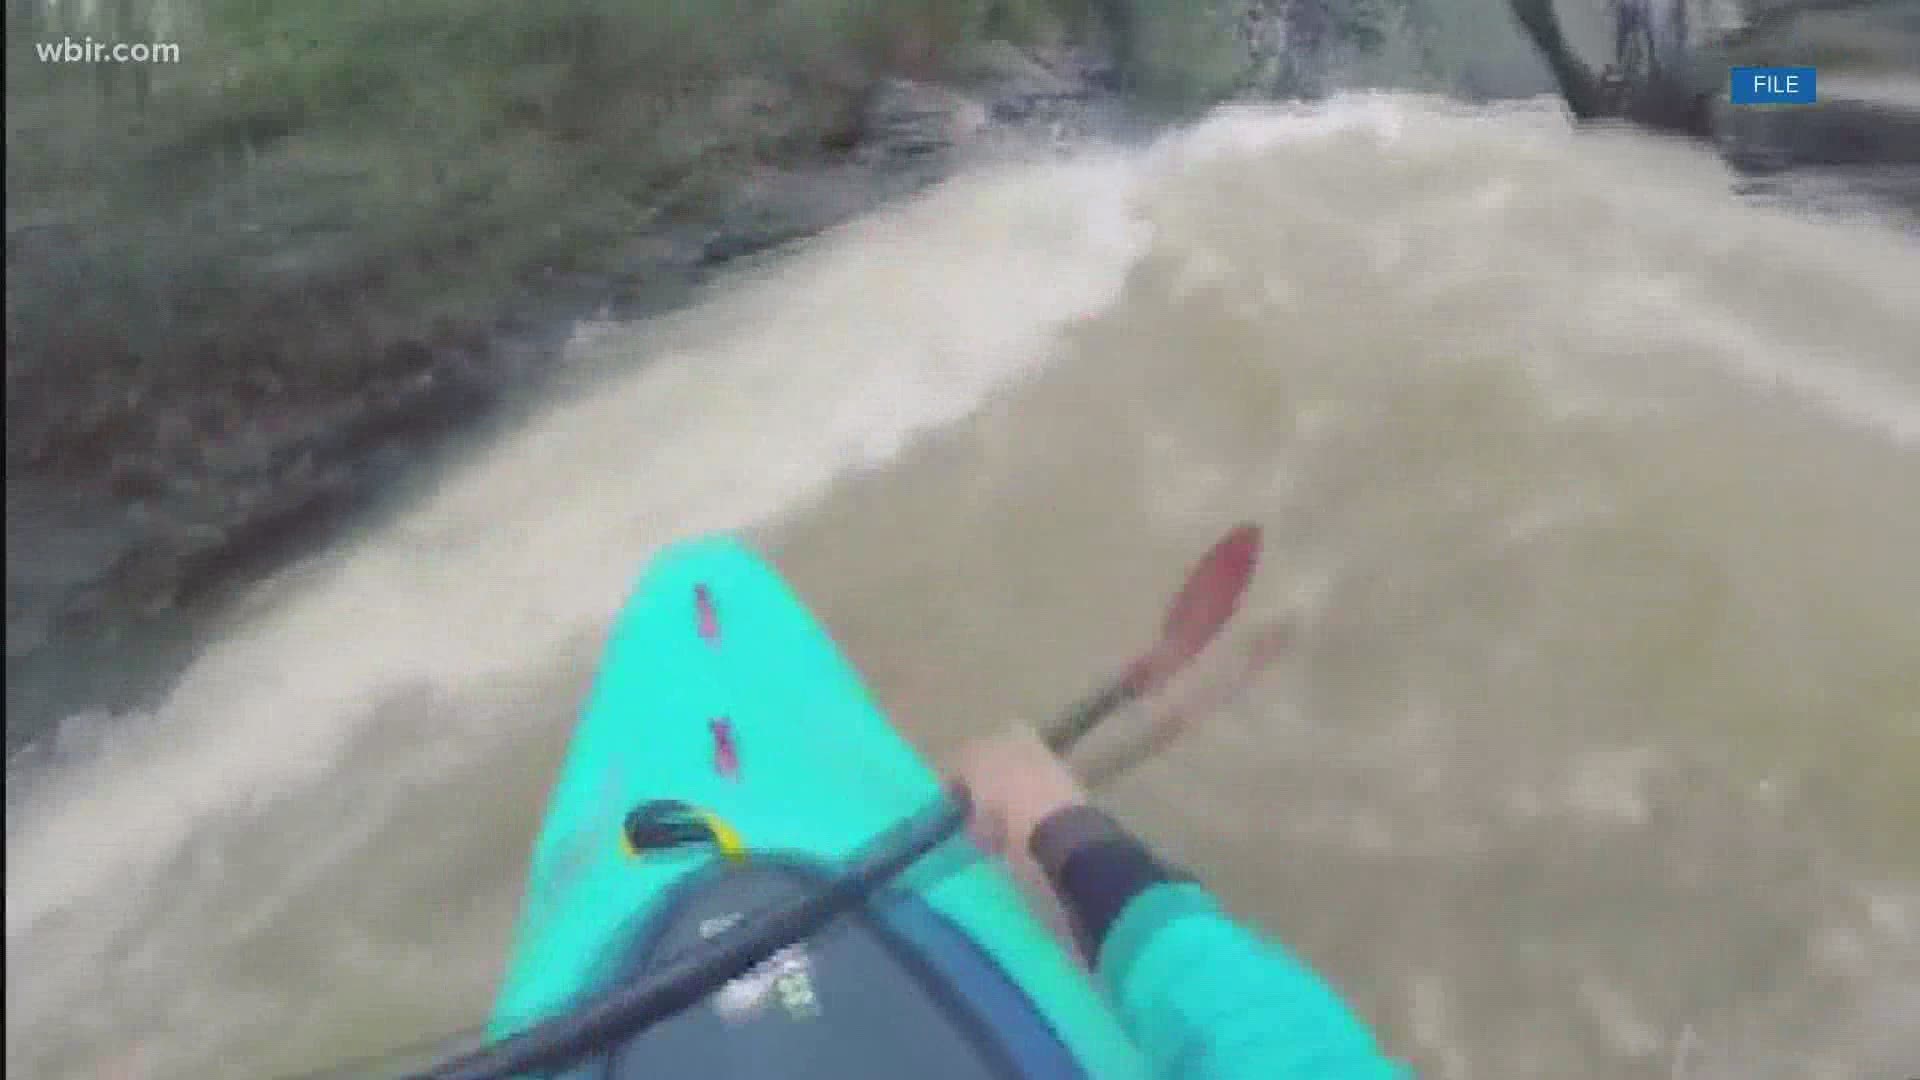 American Whitewater, a river conservation nonprofit, said that there were nine reported paddler deaths in 2020.